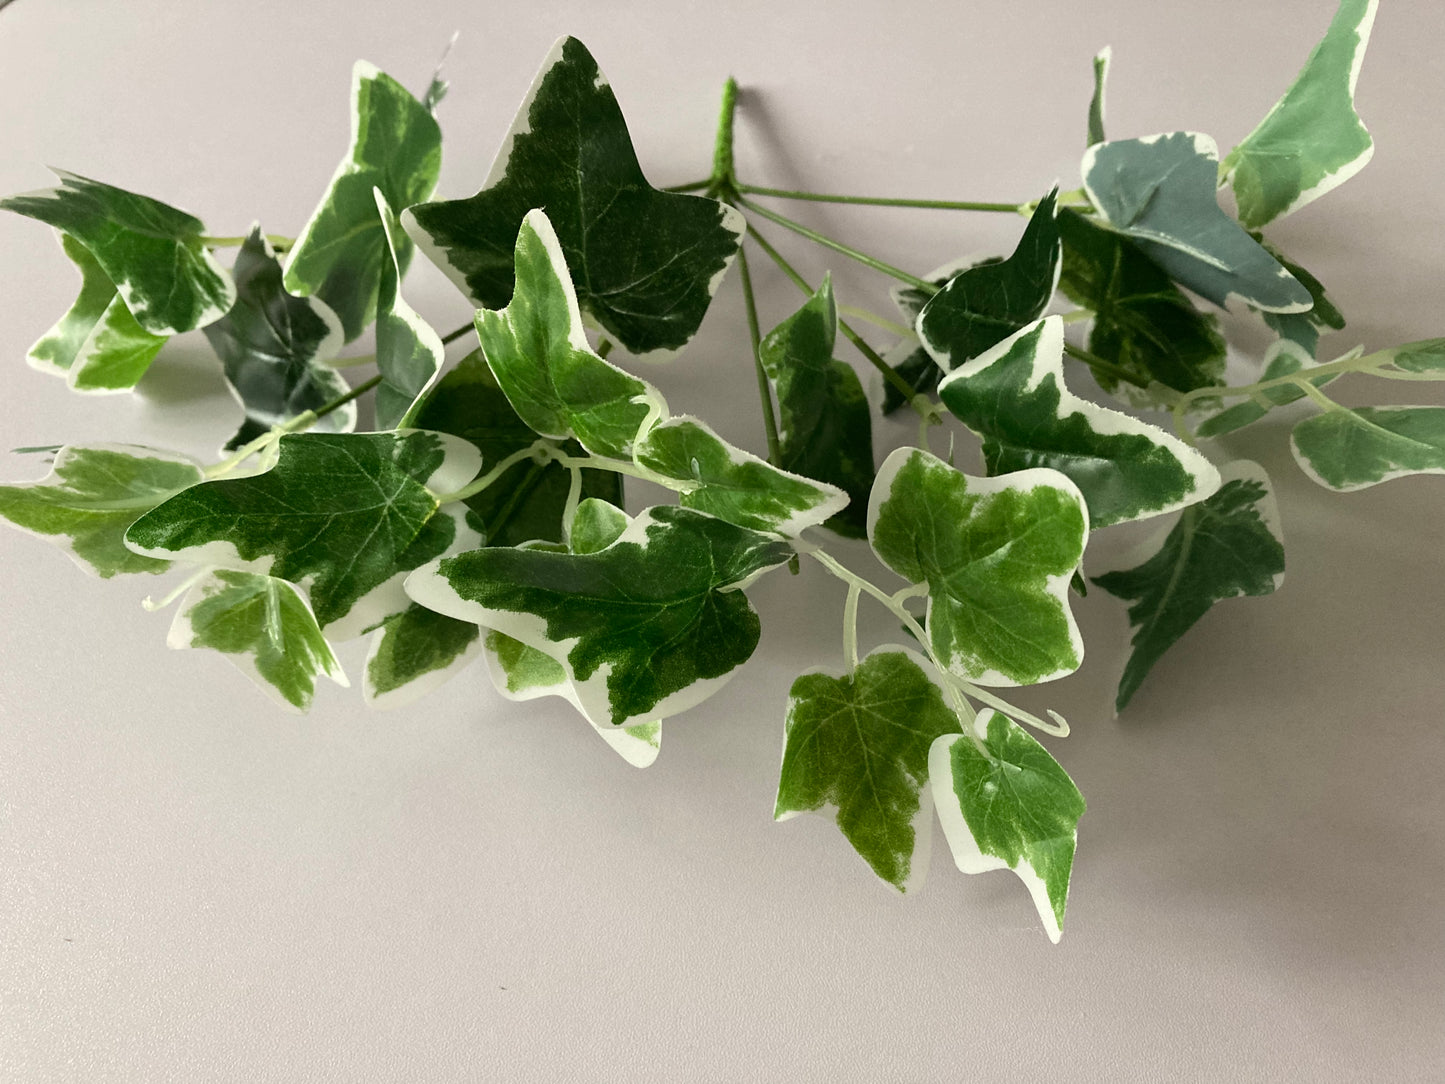 Variegated Ivy Bunch